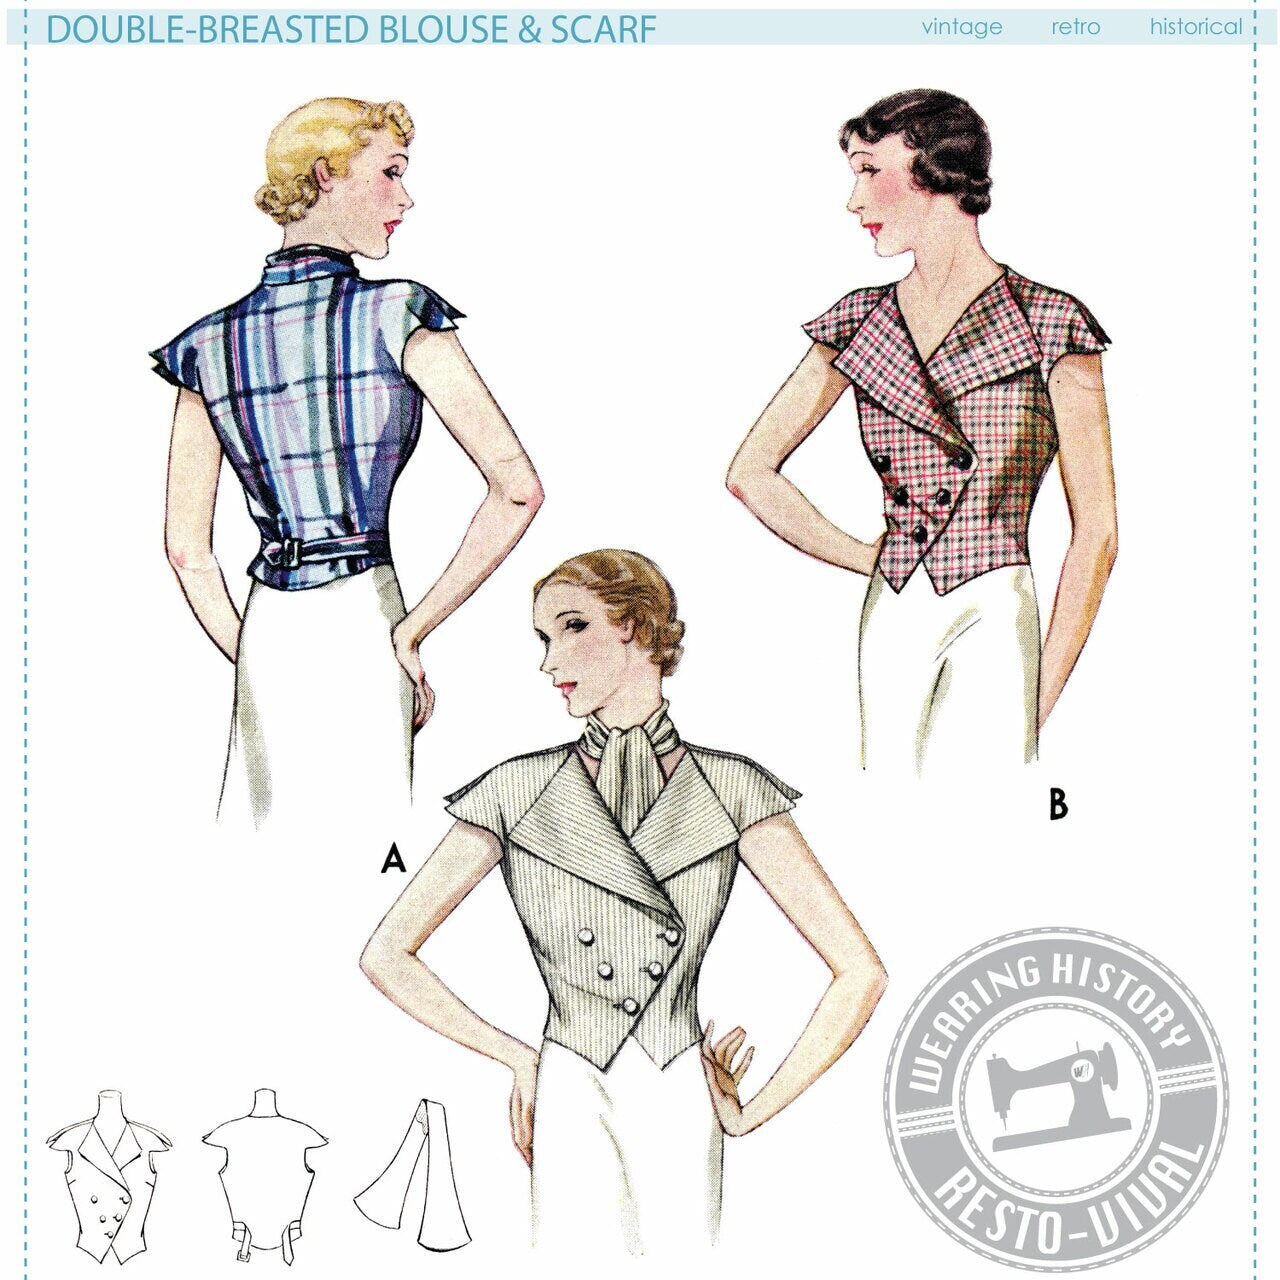 PRINTED PATTERN- 1930s Double Breasted Blouse & Scarf Pattern